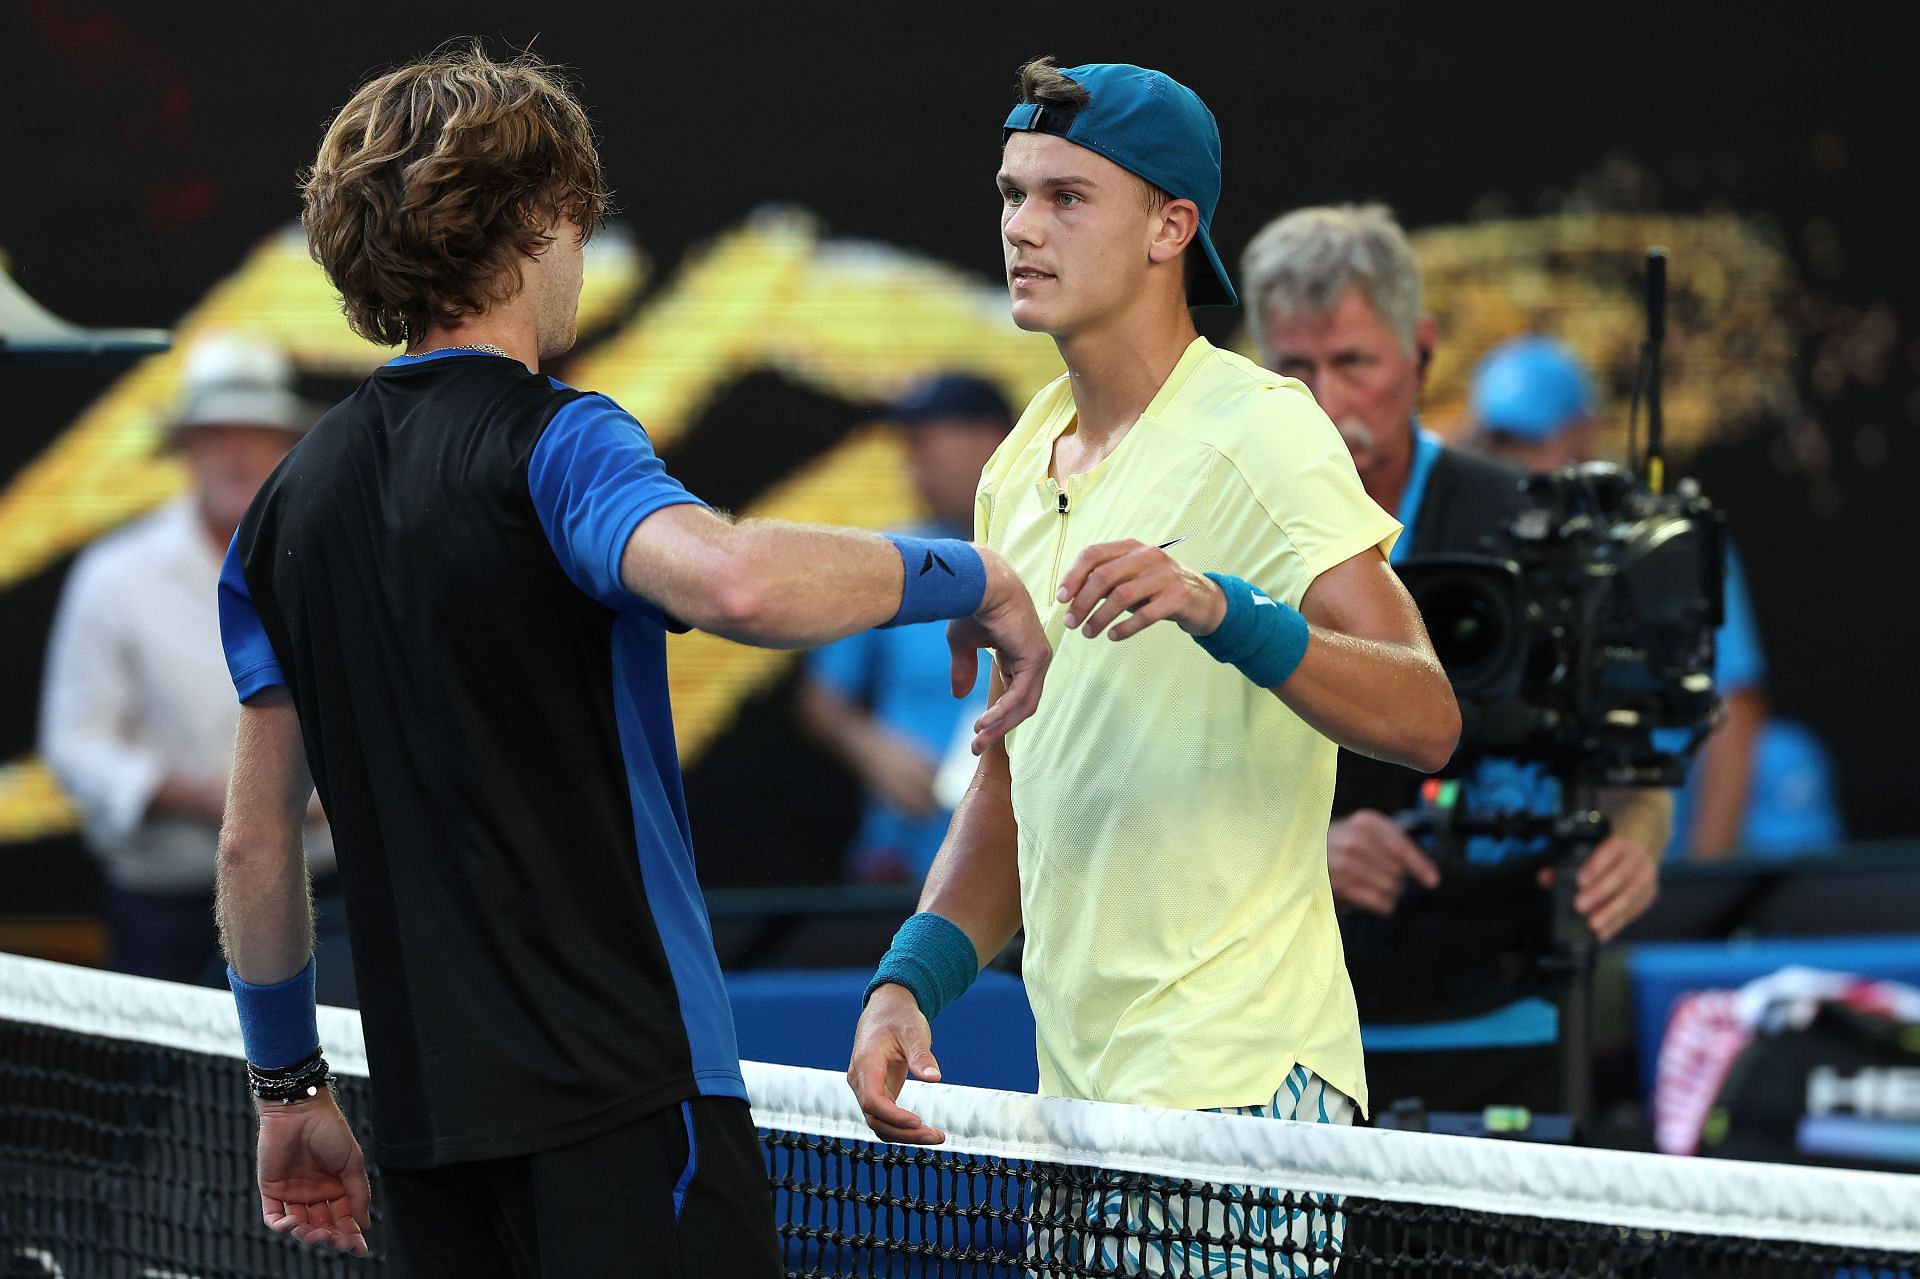 Andrey Rublev and Holger Rune at the 2023 Australian Open